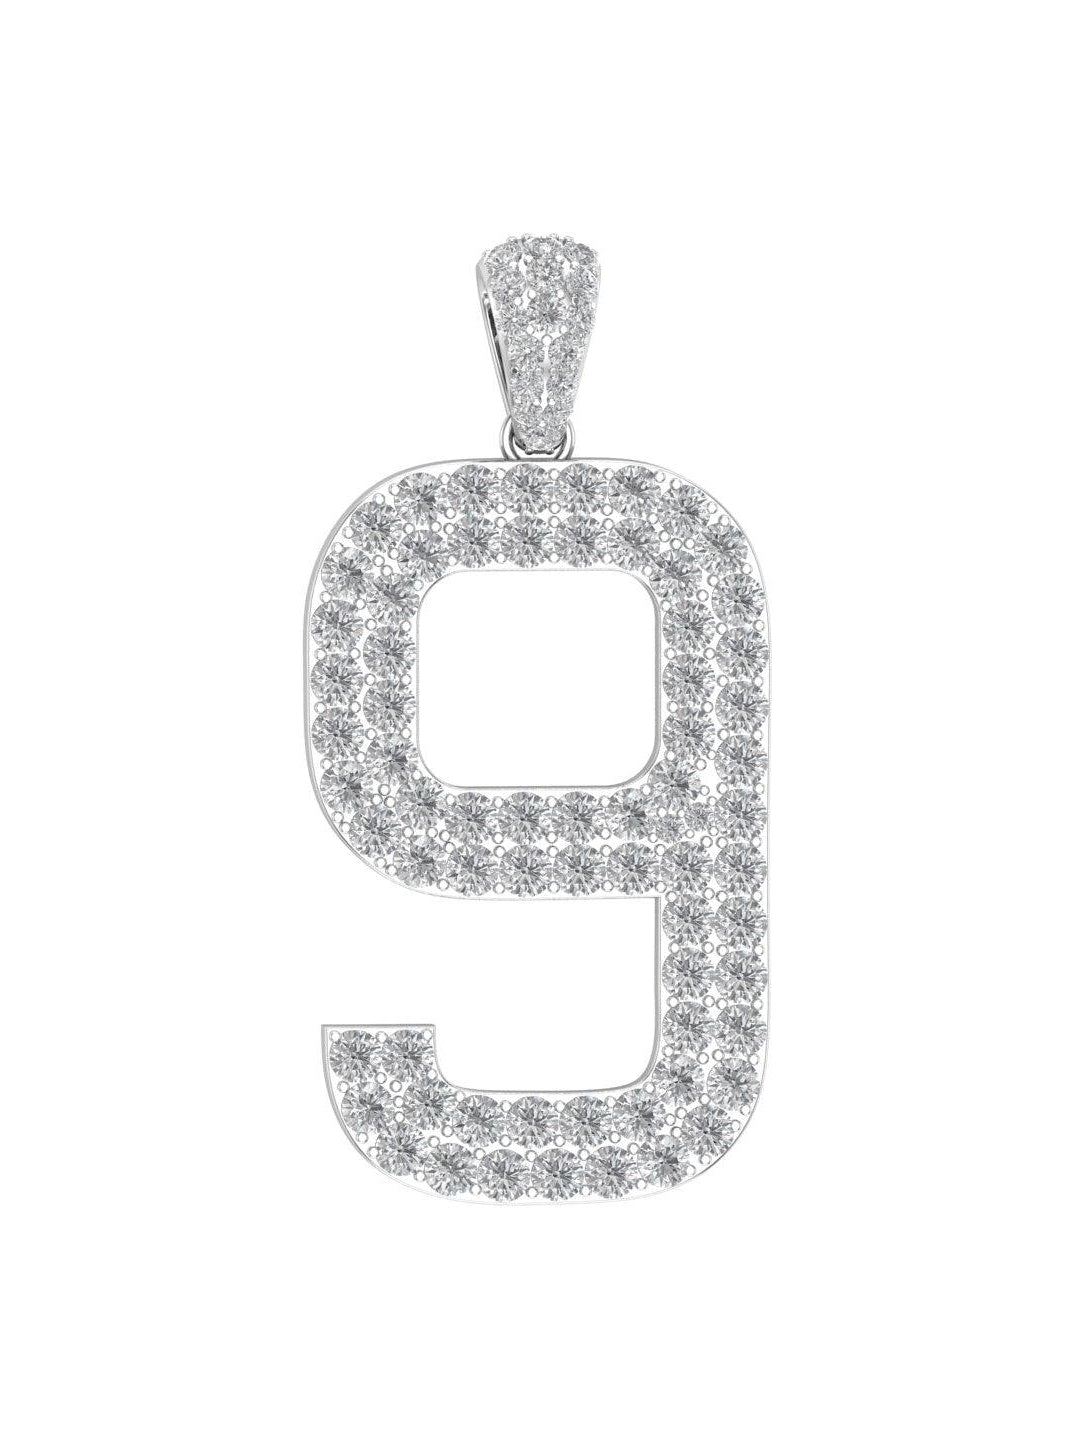 White Gold Color Pendant in the Shape of 9 Made of 925 Sterling Silver Material with 20 Inch Long Silver Chain